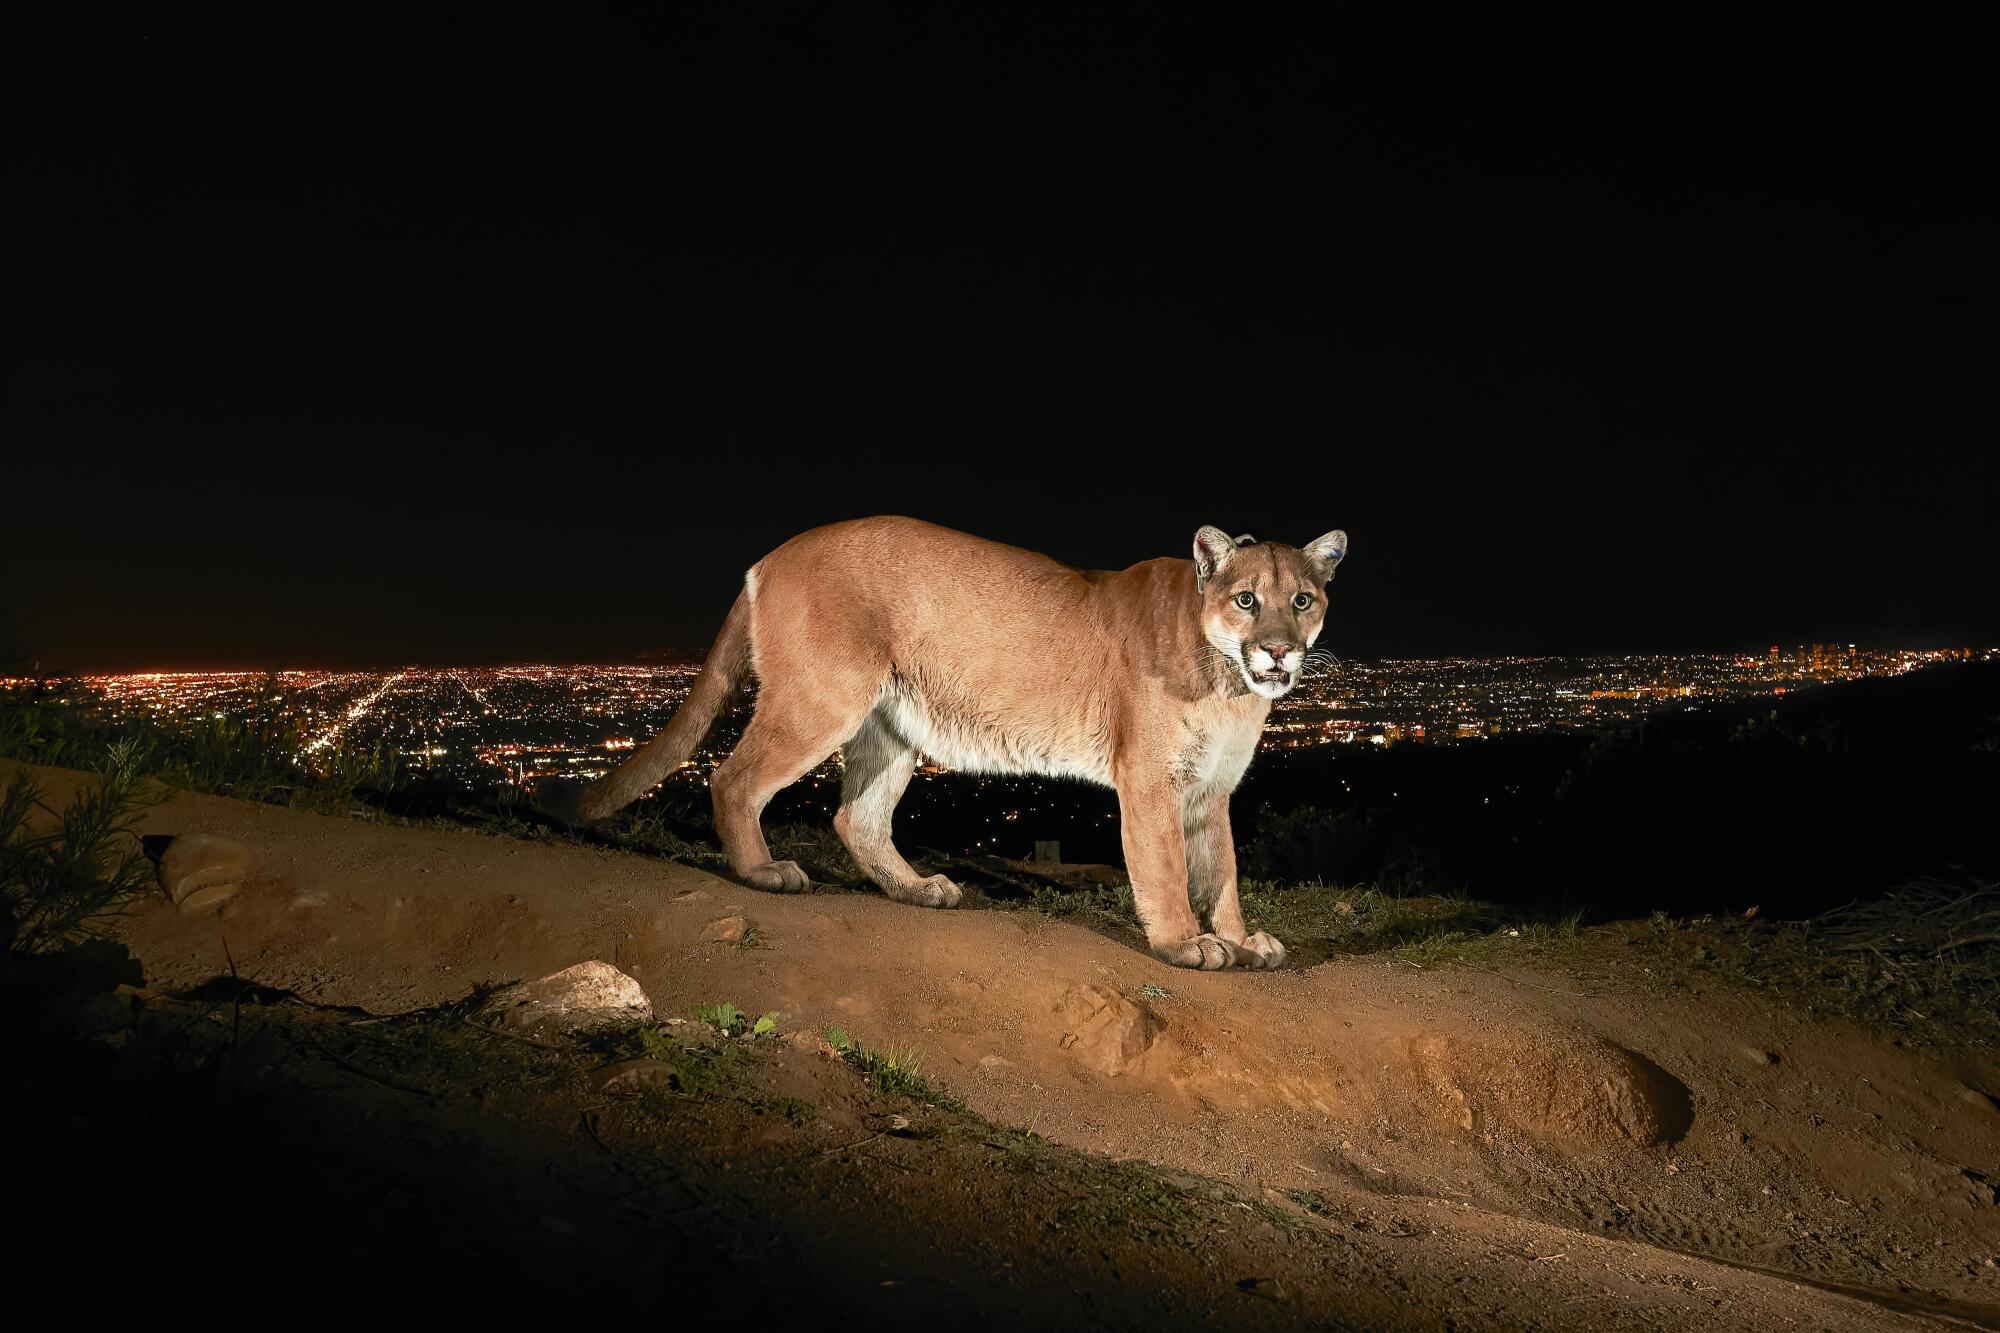 A remote camera captures P-22 at night in Griffith Park.